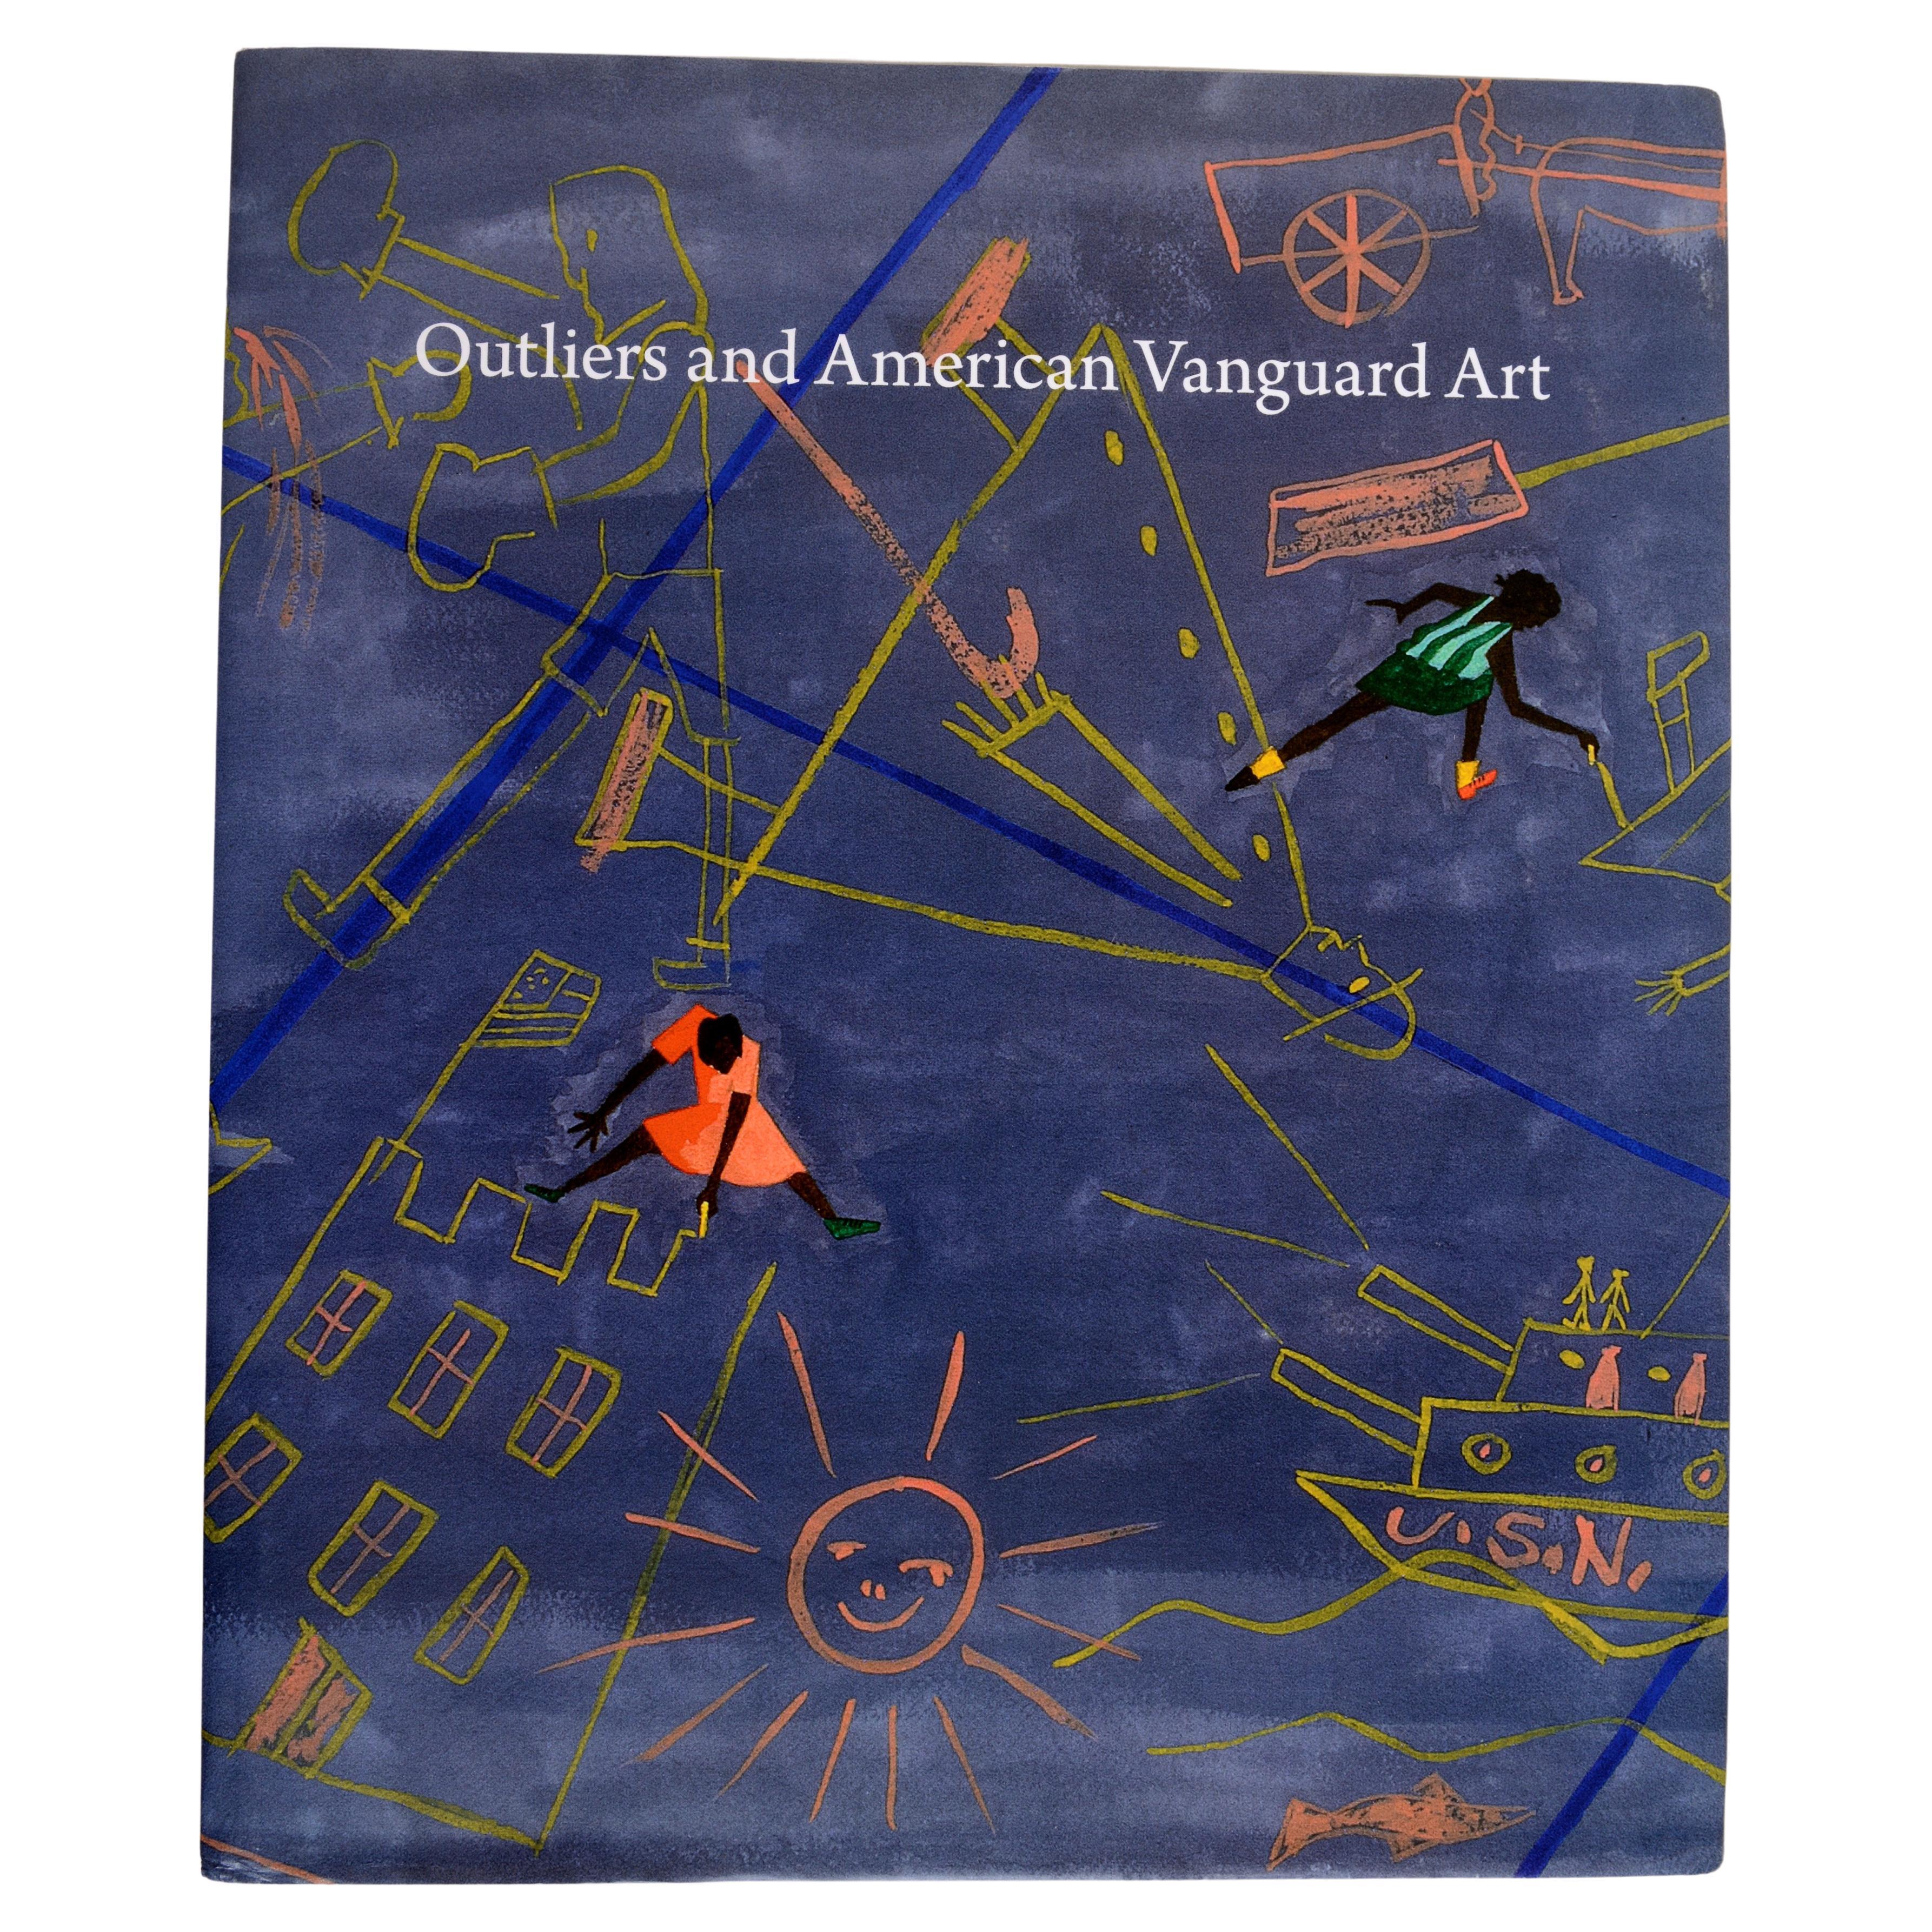 Outliers & American Vanguard Art With Letter From Director of National Gallery For Sale